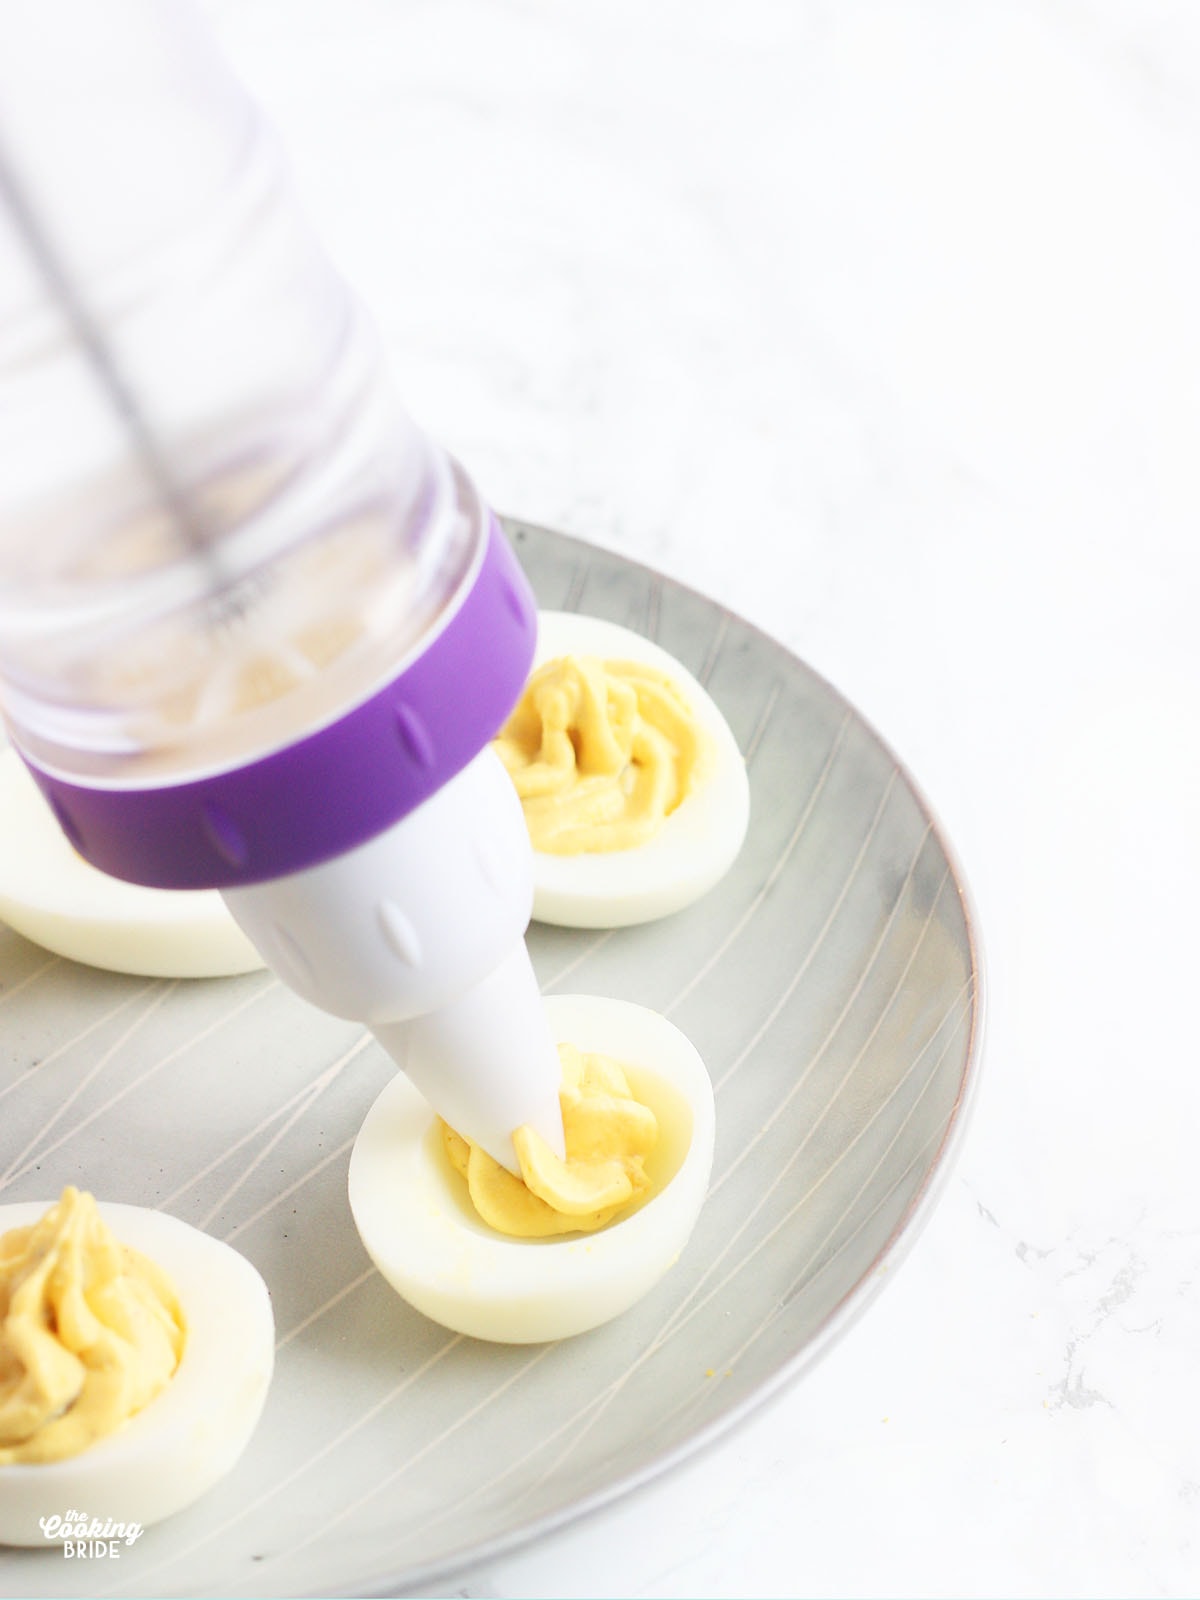 piping deviled egg filling into hollowed out egg yolks